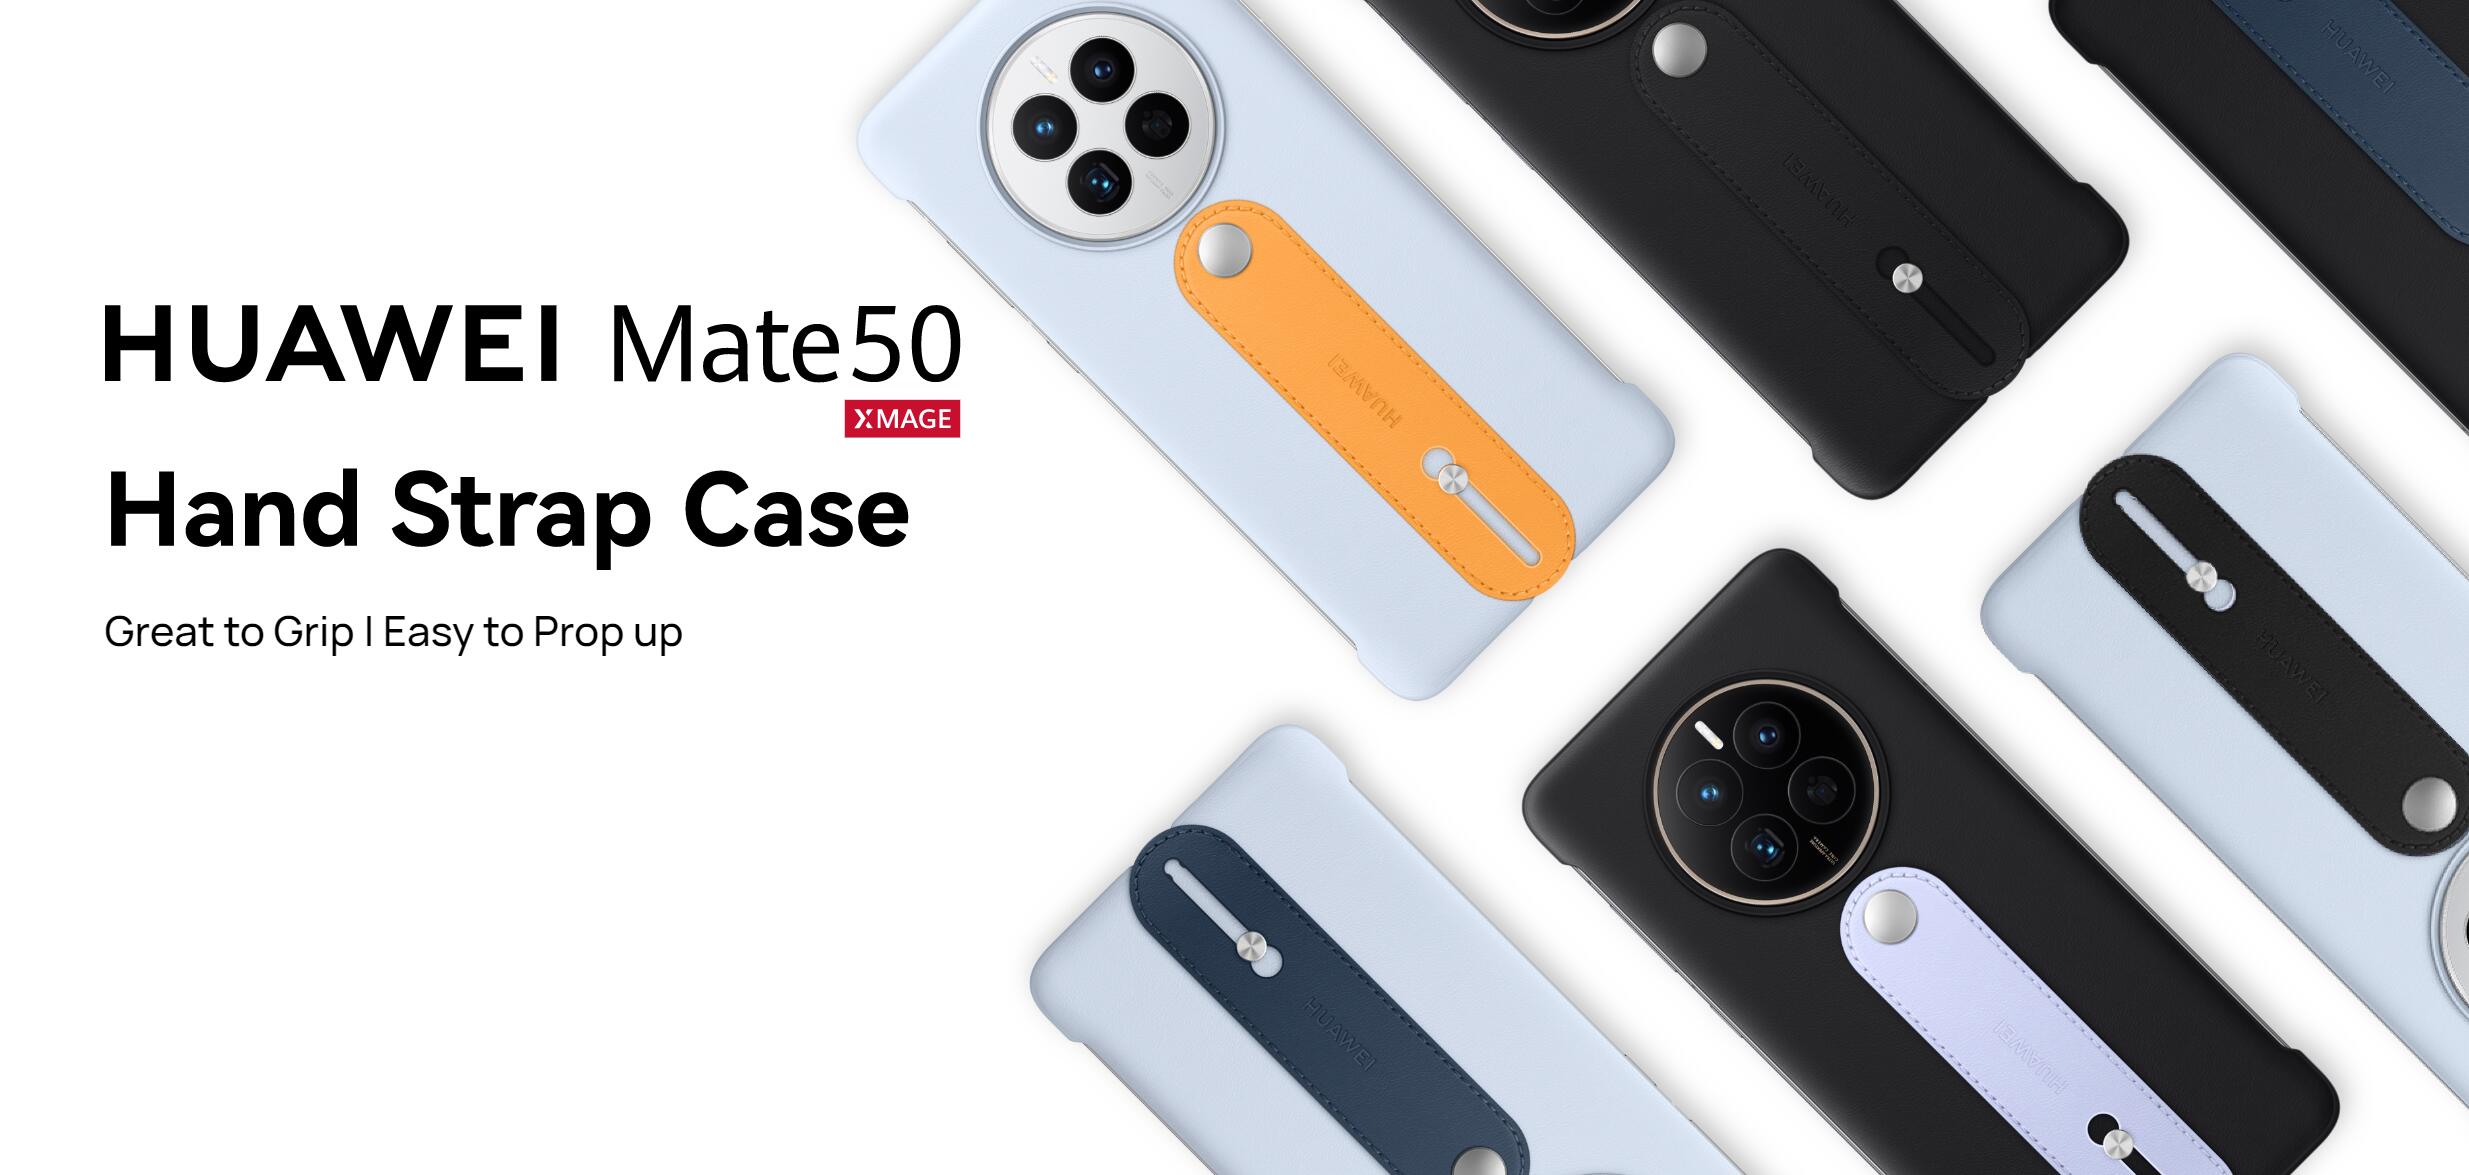 Huawei Mate 50 Hand Strap Case